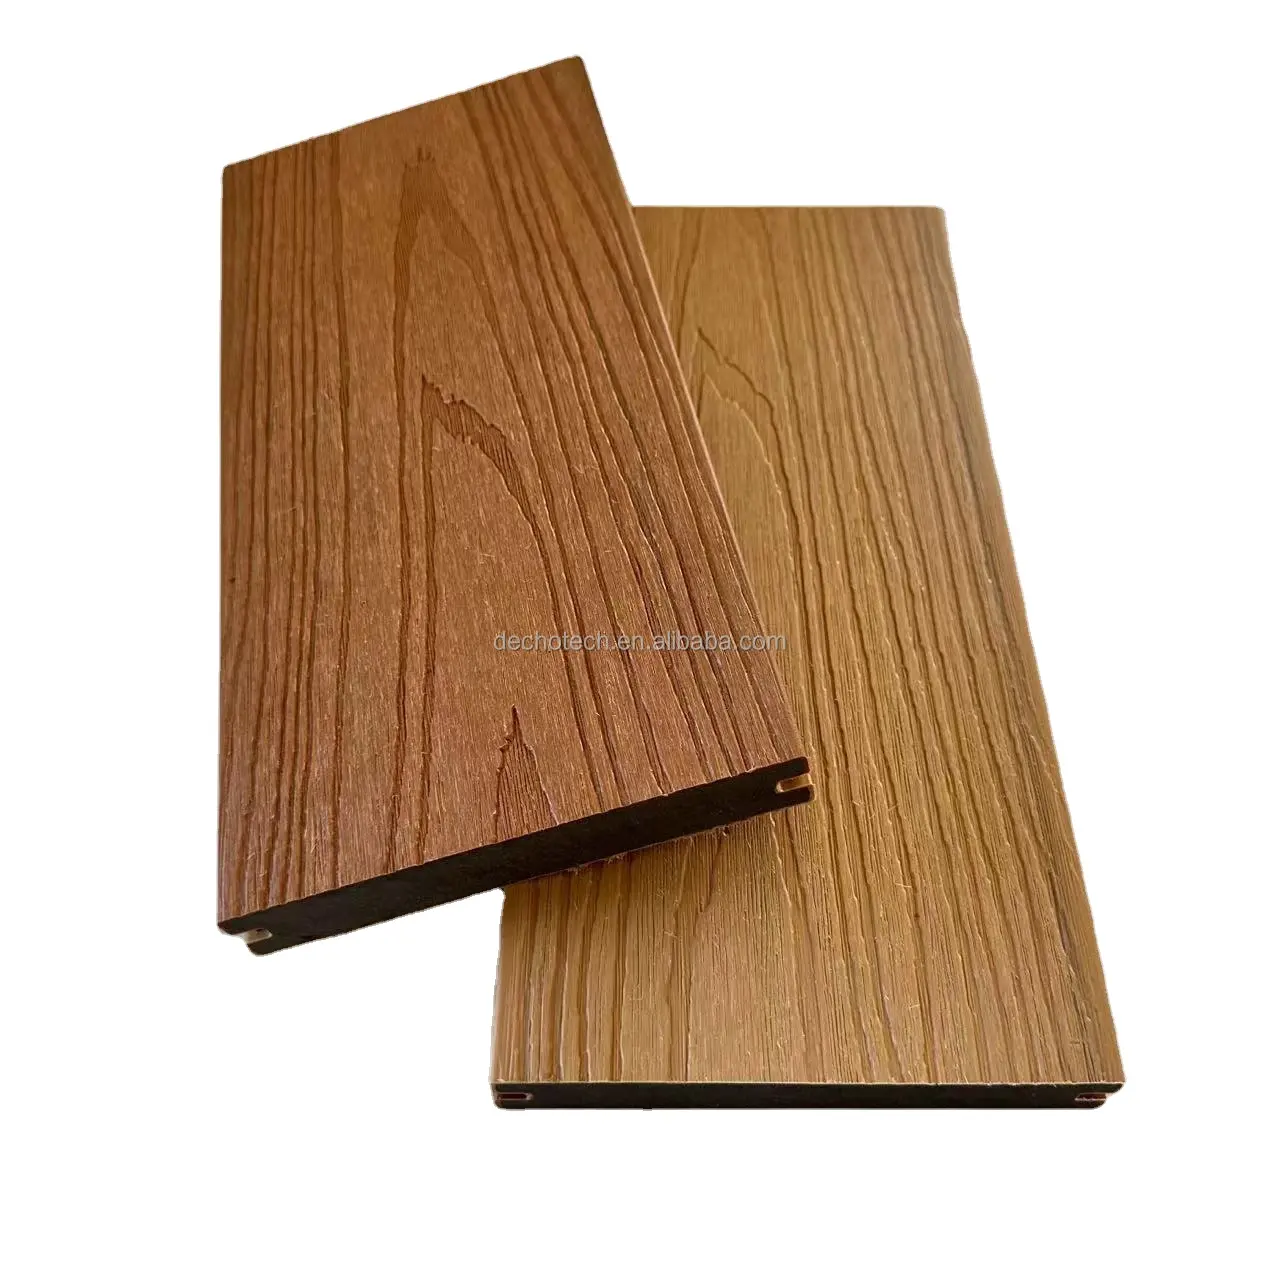 Solid Wood Plastic Composite Co-Extrusion Decking Board WPC Composite Decking Flooring Outdoor